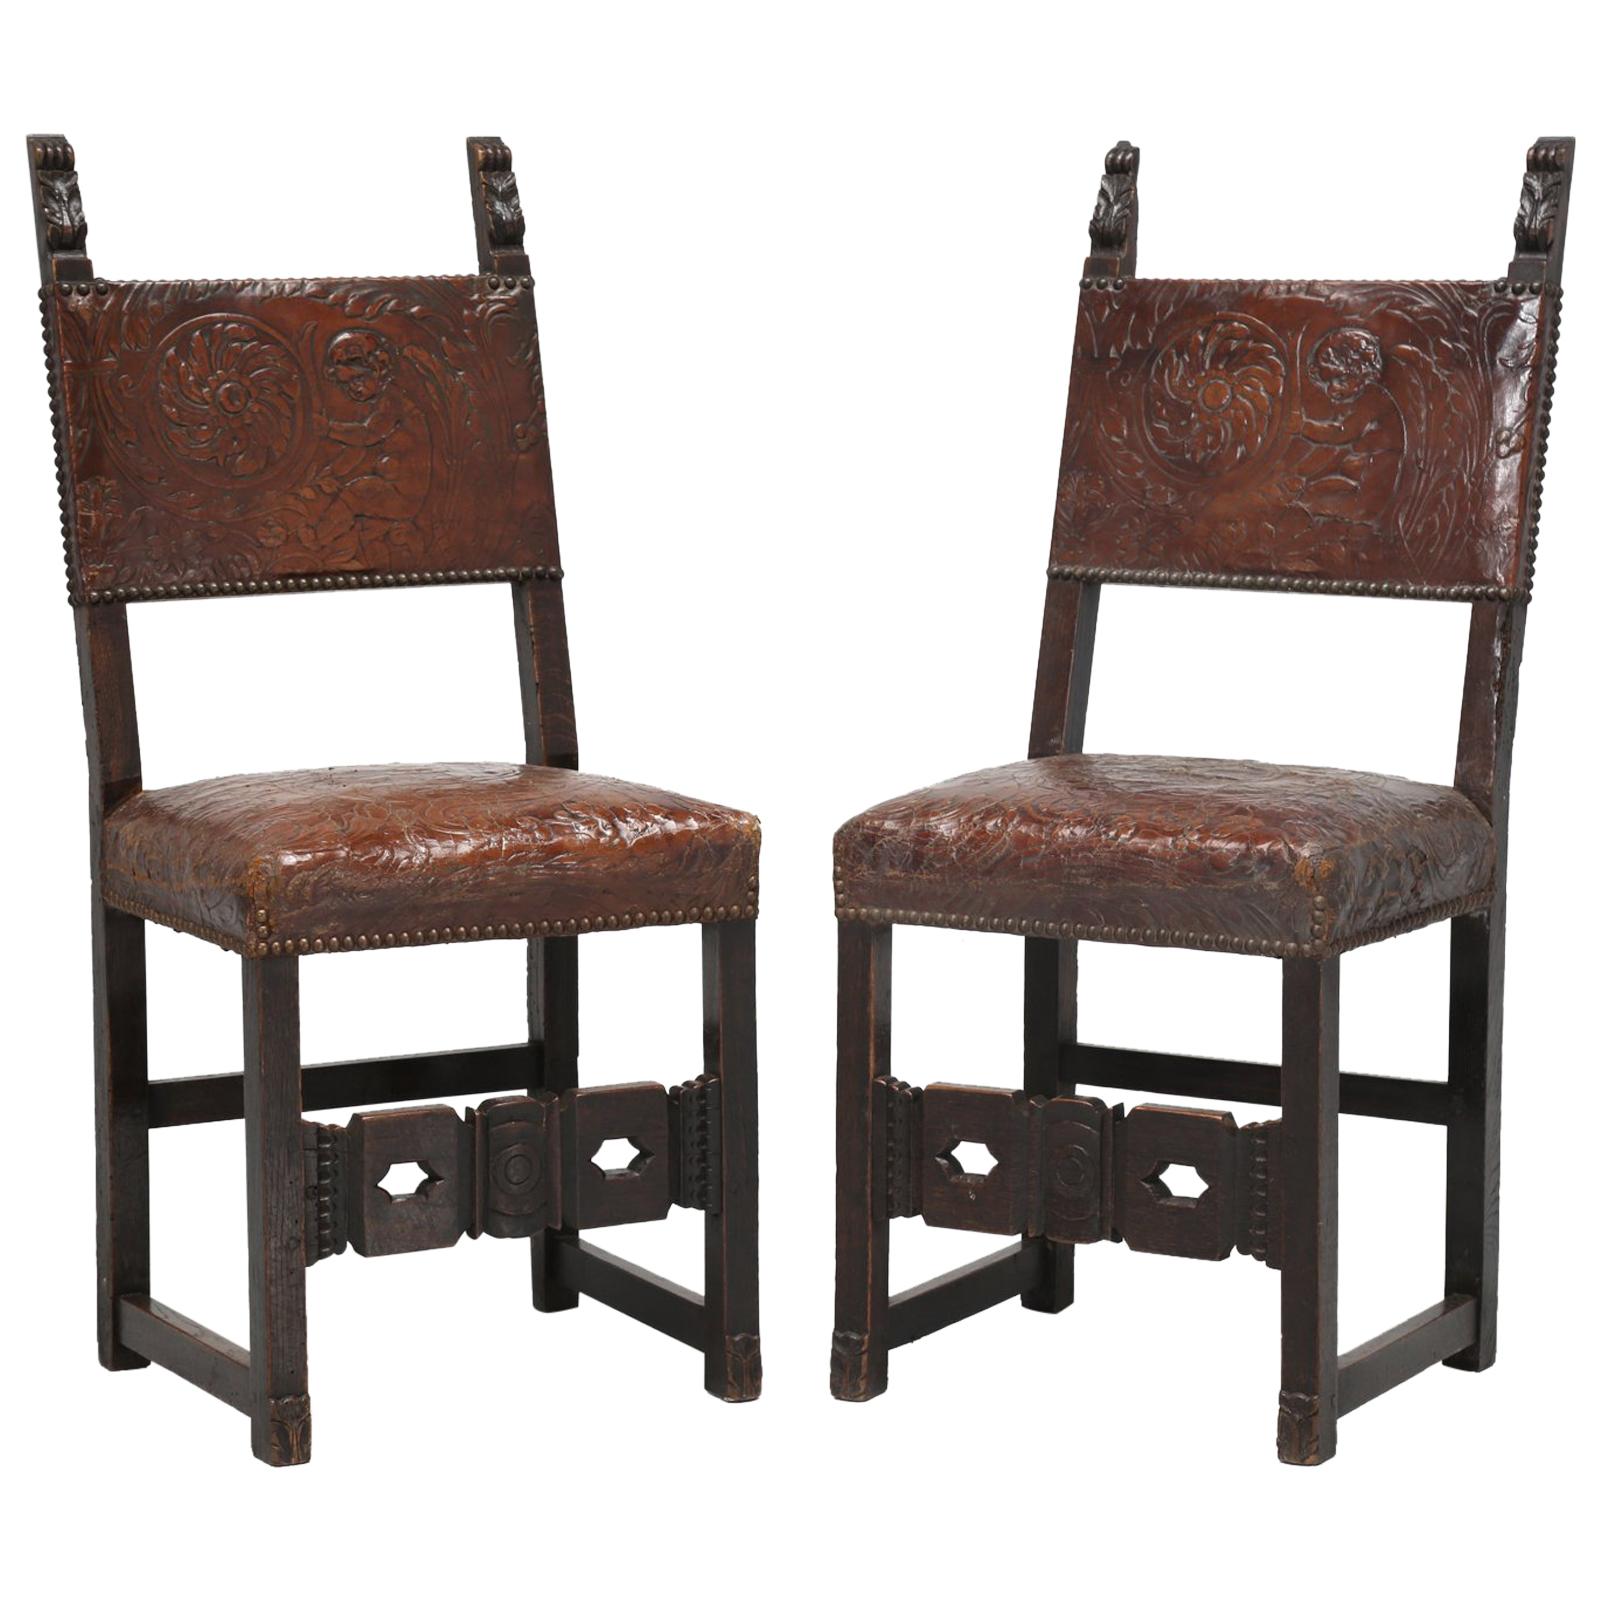 Pair Spanish Tooled Leather Antique Chairs